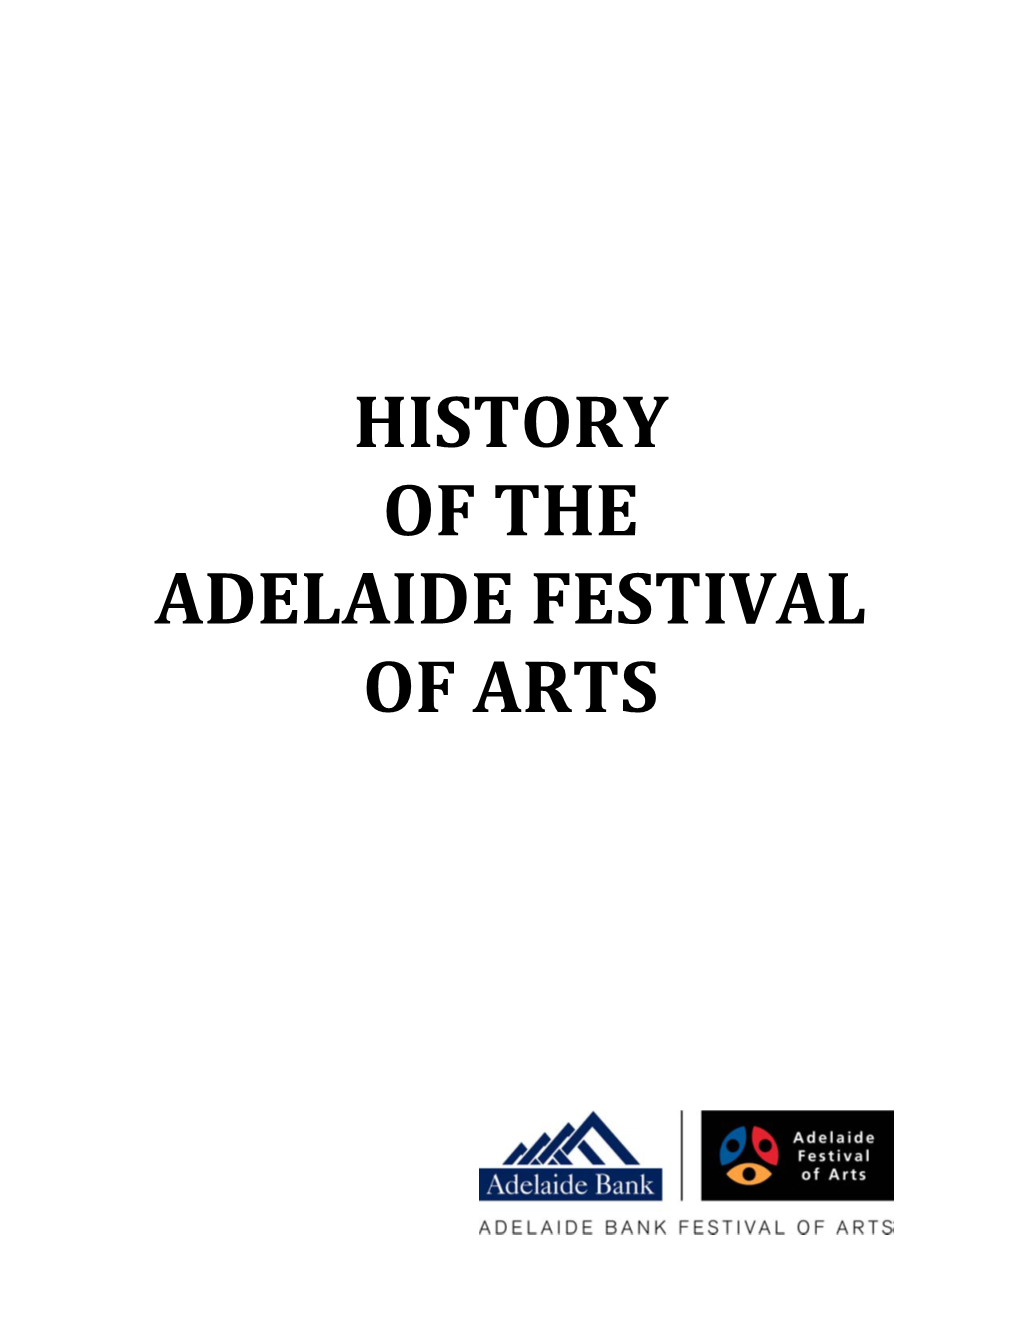 History of the Adelaide Festival of Arts